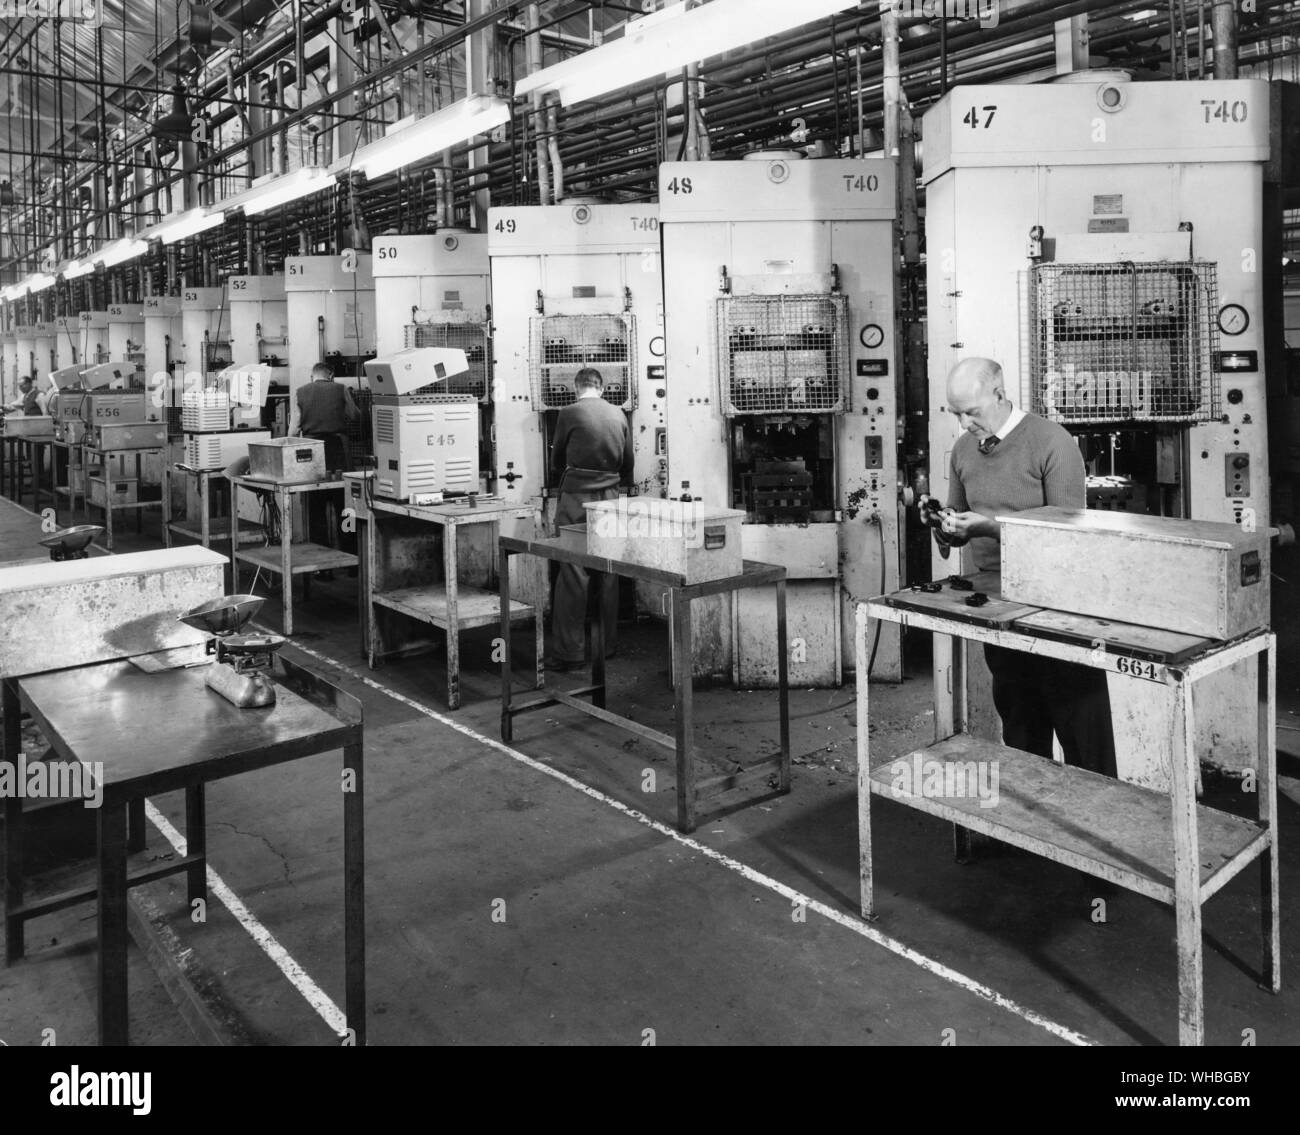 A line of 40 ton semi automatic Bipel presses suitable for use in producing small electrical components . The bench apparatus alongside press 49 is a high frequency heater used to preheat the moulding component . The line was in use in December 1960 at the National Plastics Plant in Avenue Works , London , E4 , England . Stock Photo